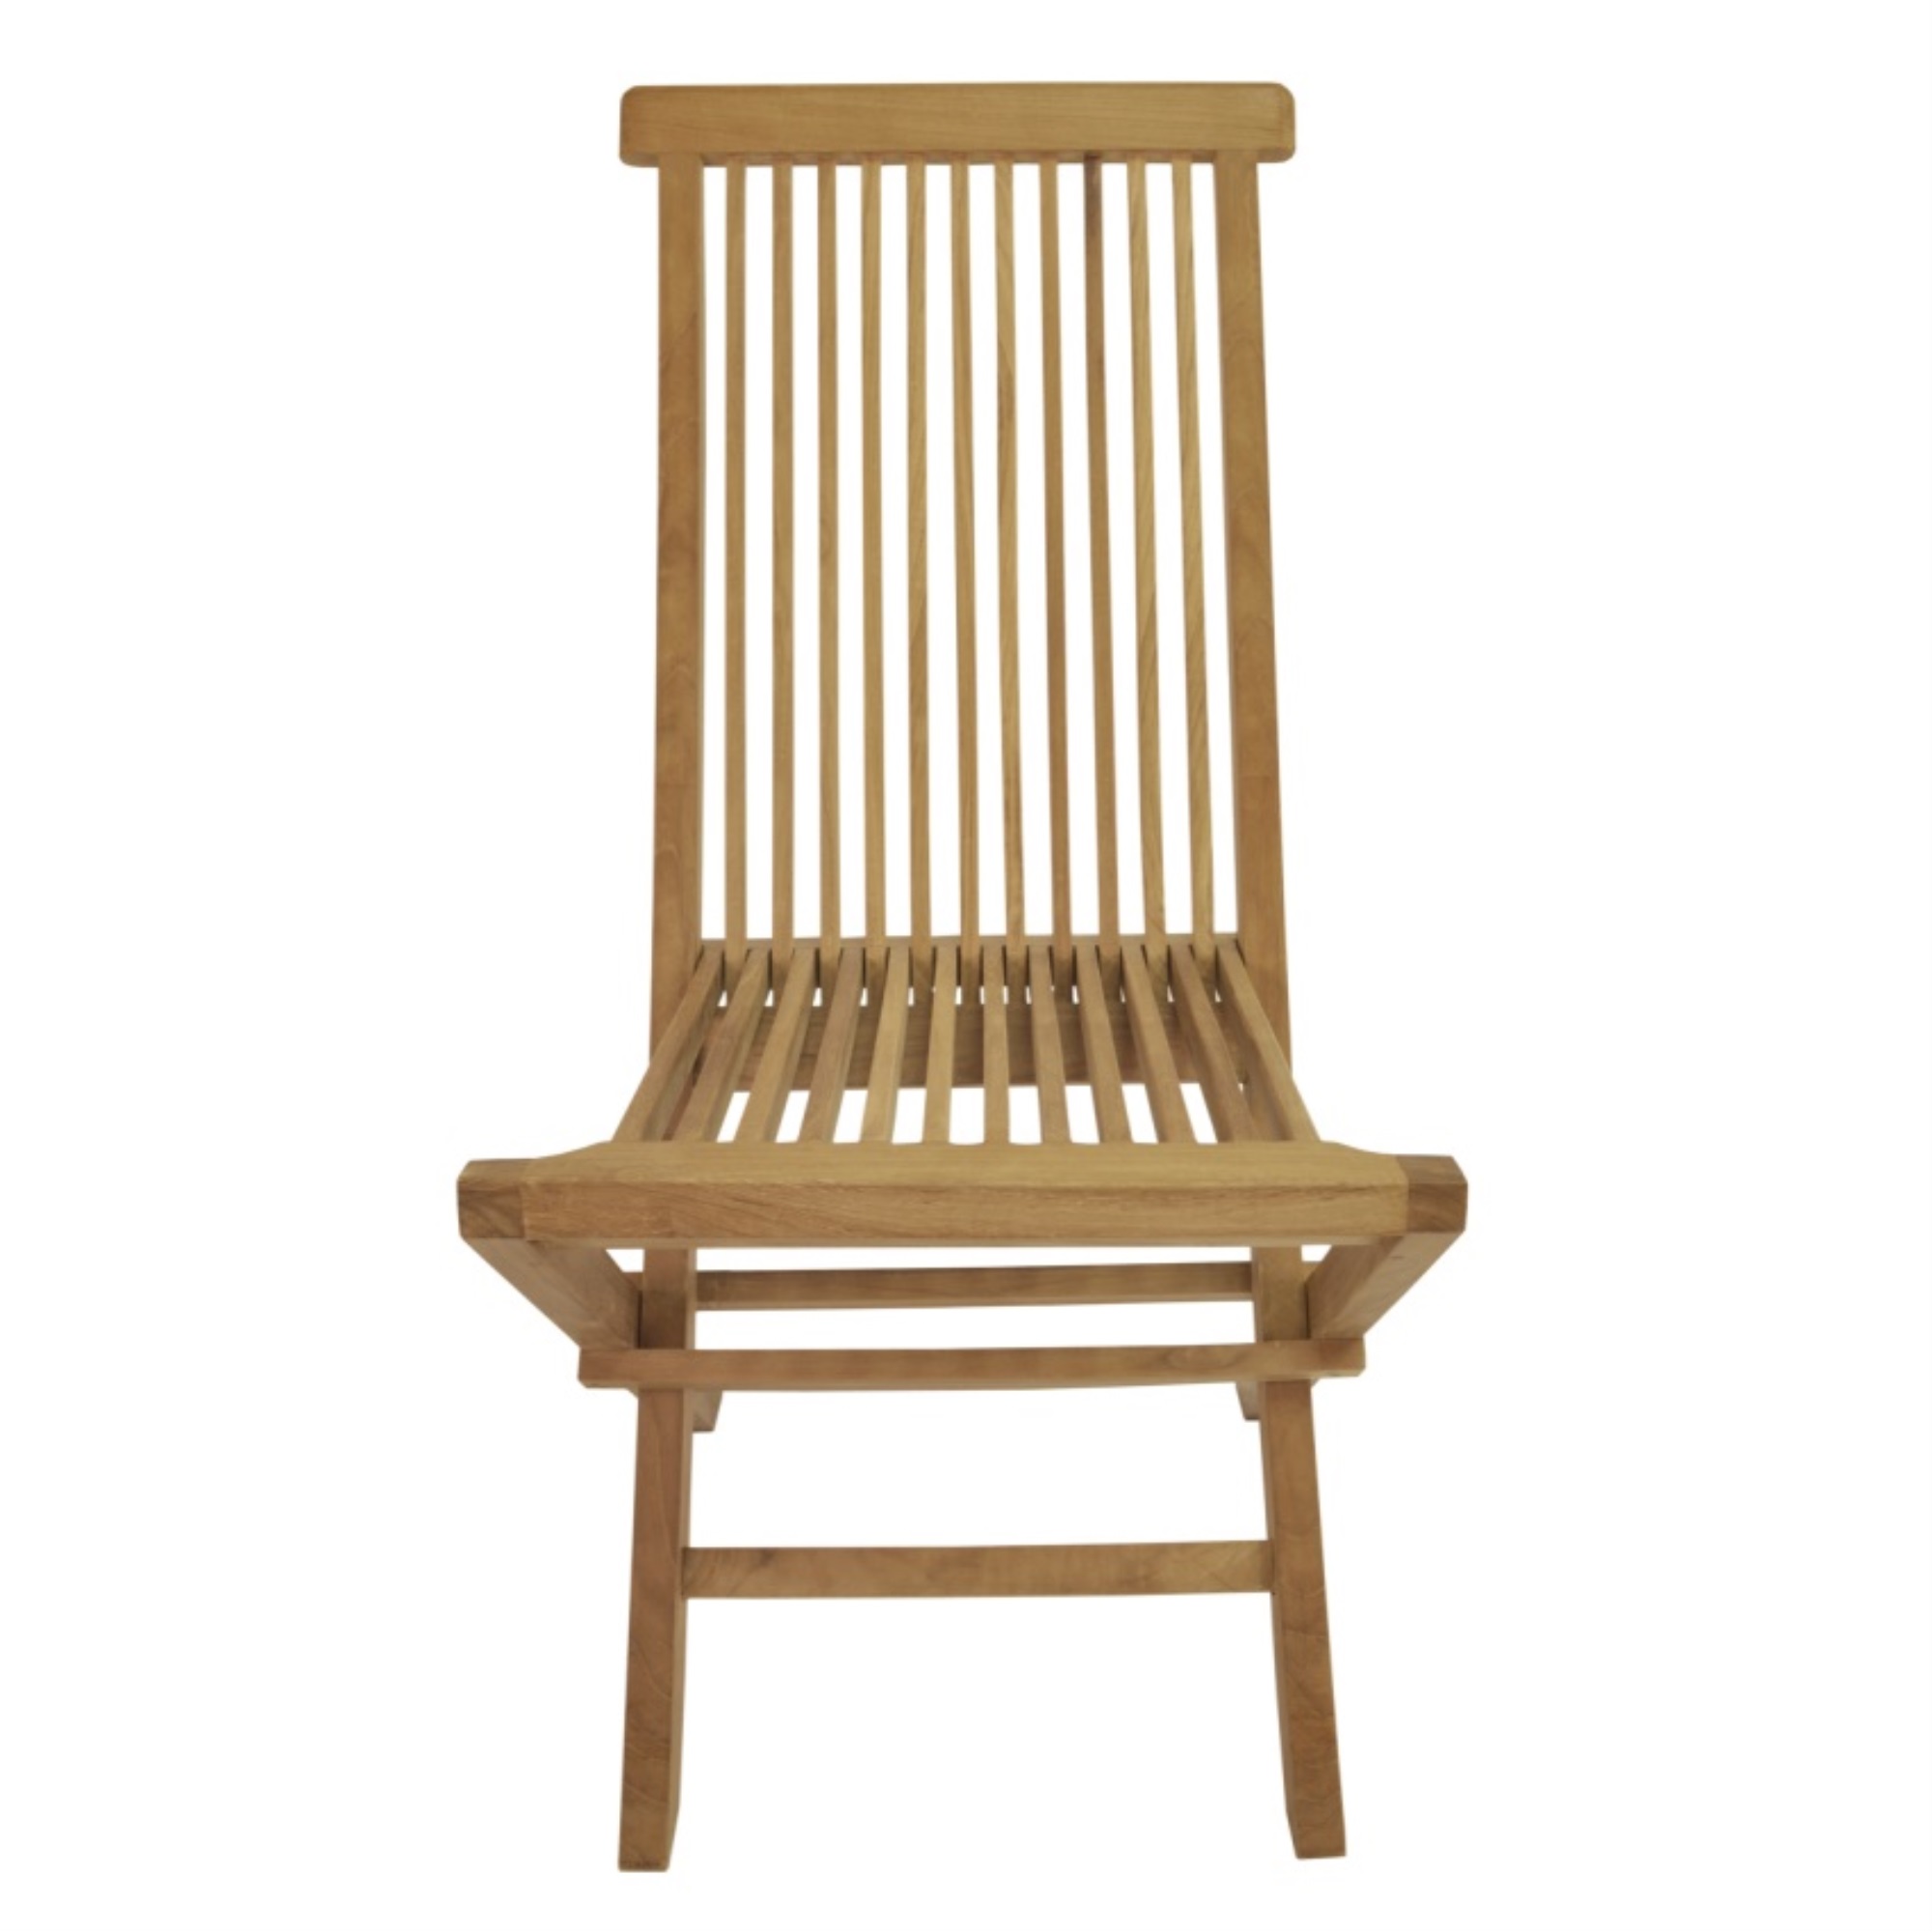 Anderson Teak Classic Folding Chair - image 4 of 5